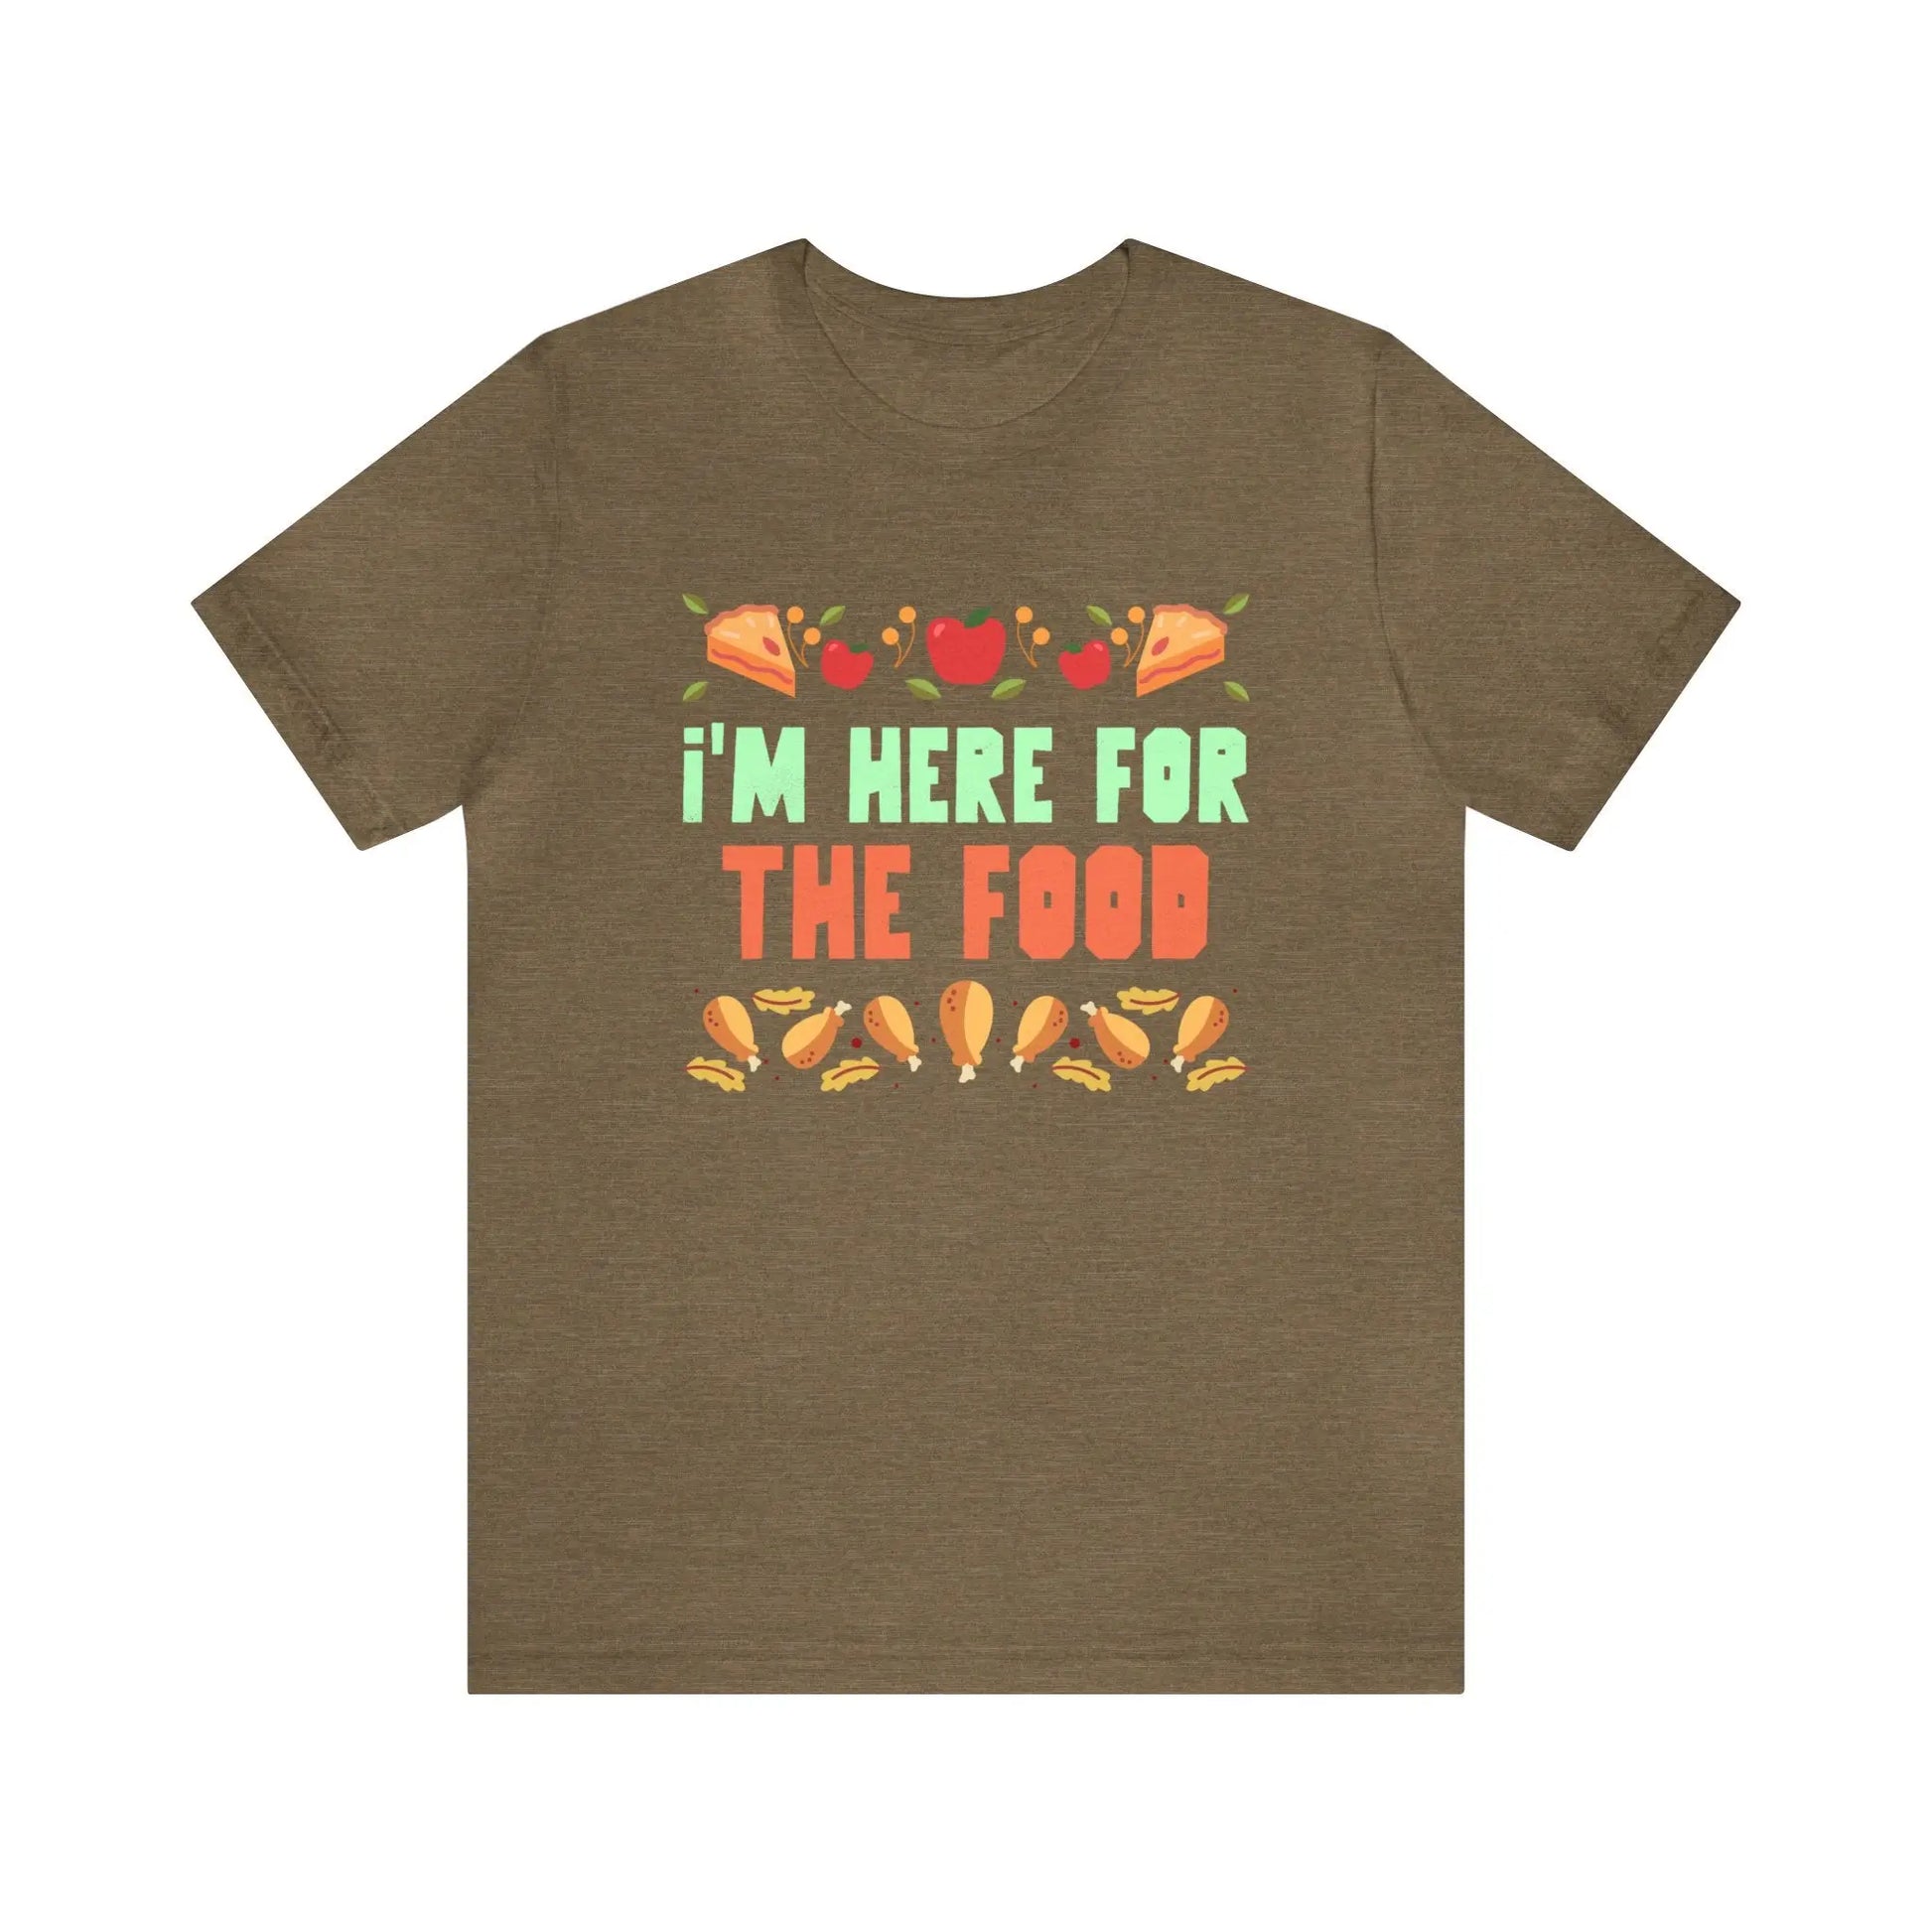 I'm Here For The Food Men's Jersey Short Sleeve Tee - Wicked Tees